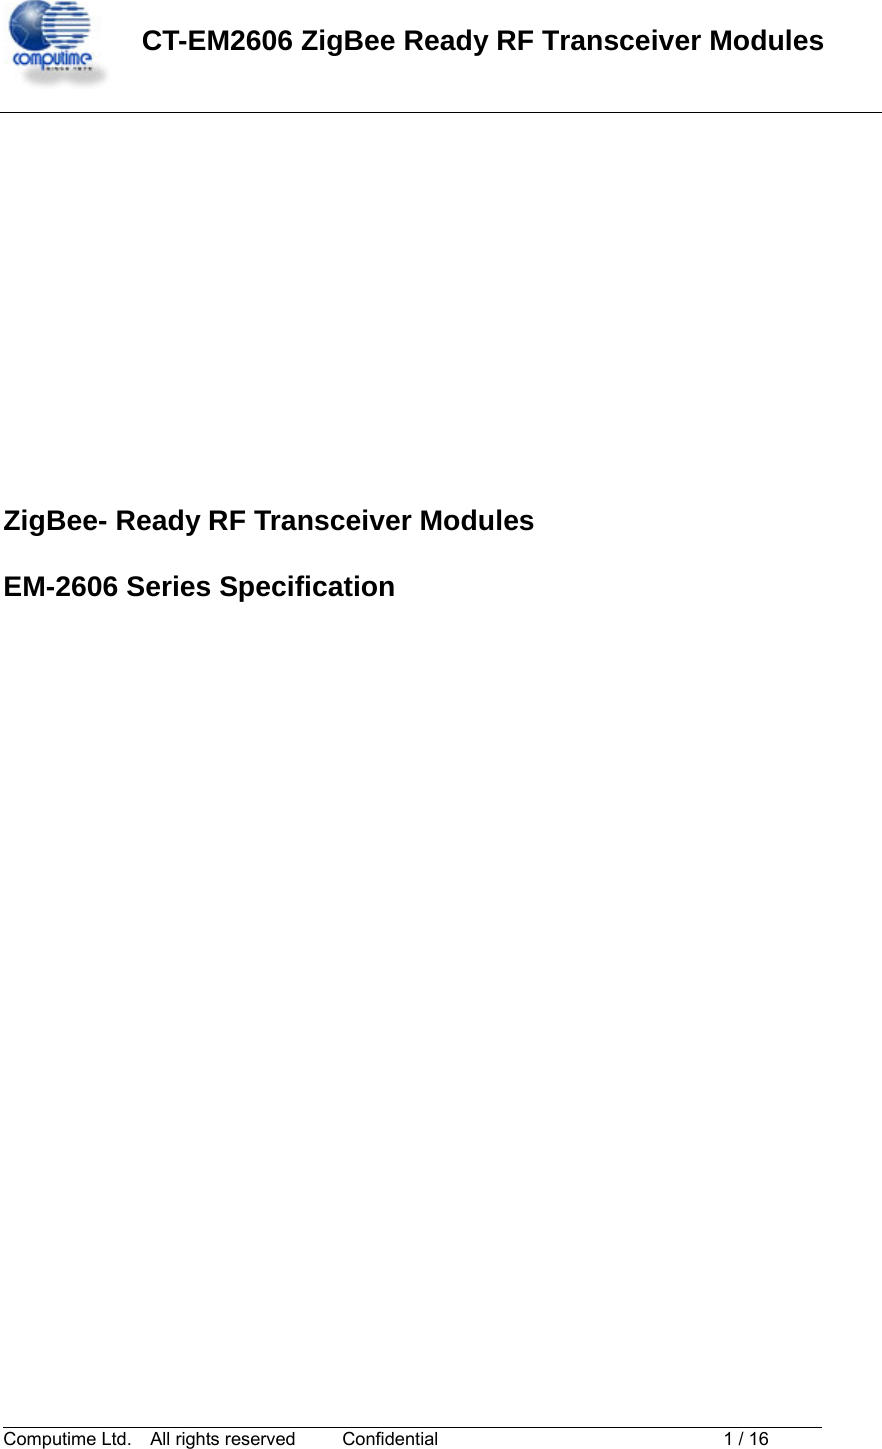  CT-EM2606 ZigBee Ready RF Transceiver Modules                                                                                Computime Ltd.    All rights reserved   Confidential              1 / 16               ZigBee- Ready RF Transceiver Modules  EM-2606 Series Specification 